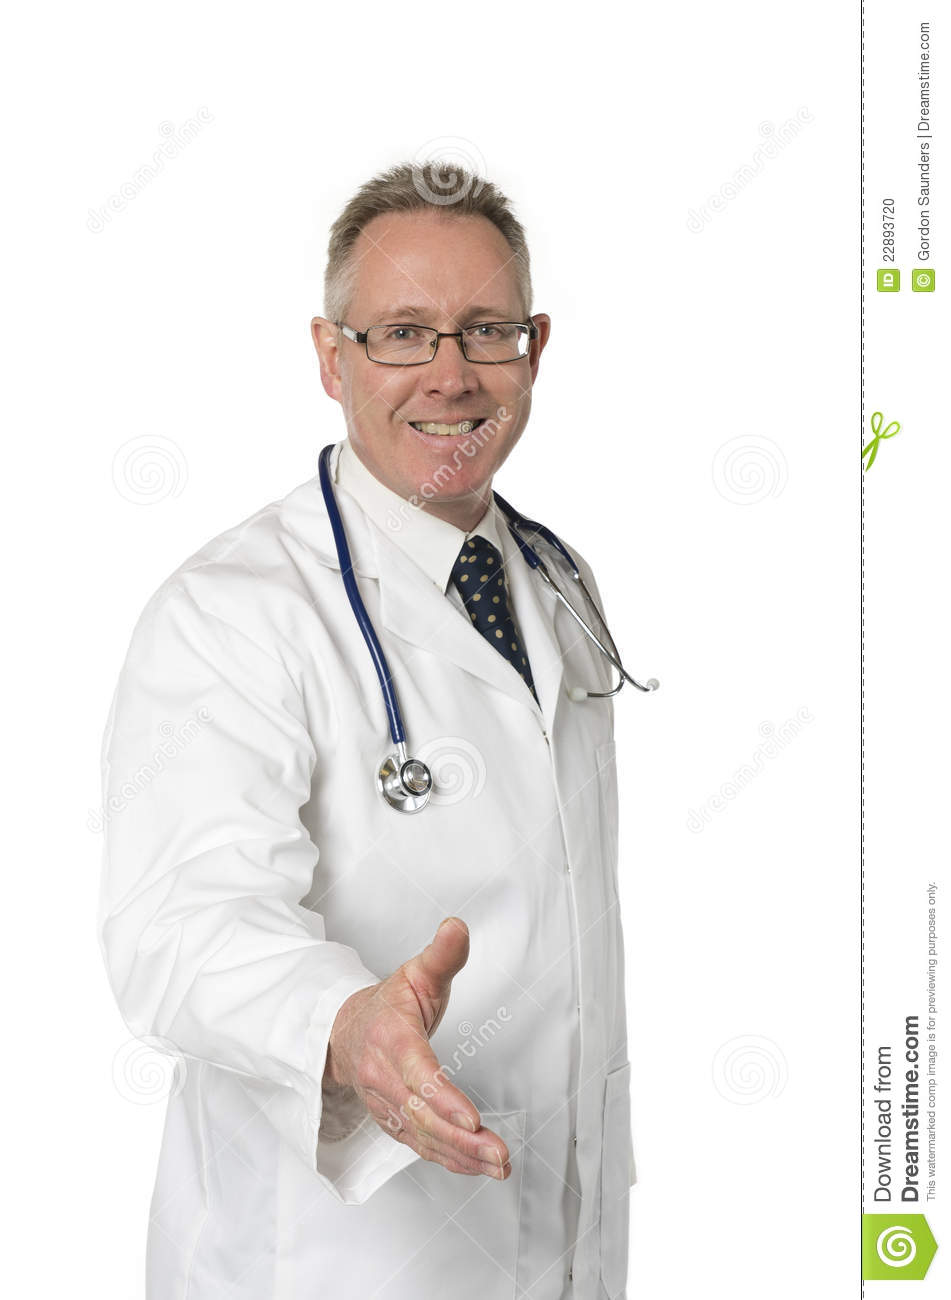     Similar Stock Images Of   Smiling Doctor On White Offers Hand Shake